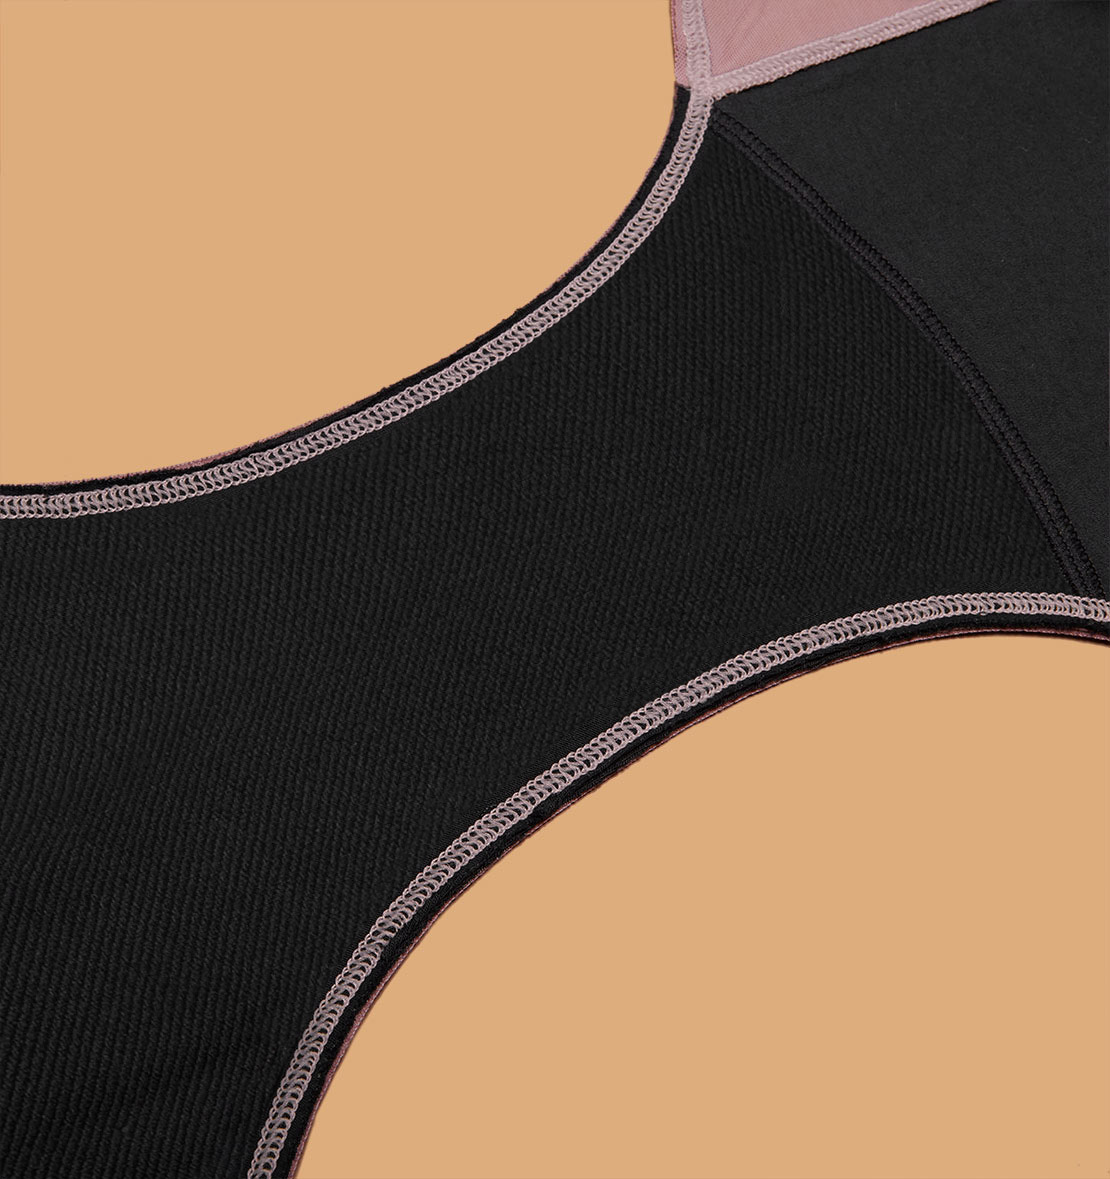 Rest assured, you can count on Thinx for safe, absorbent protection through  all of life's leaks. Visit the link in bio for more informa